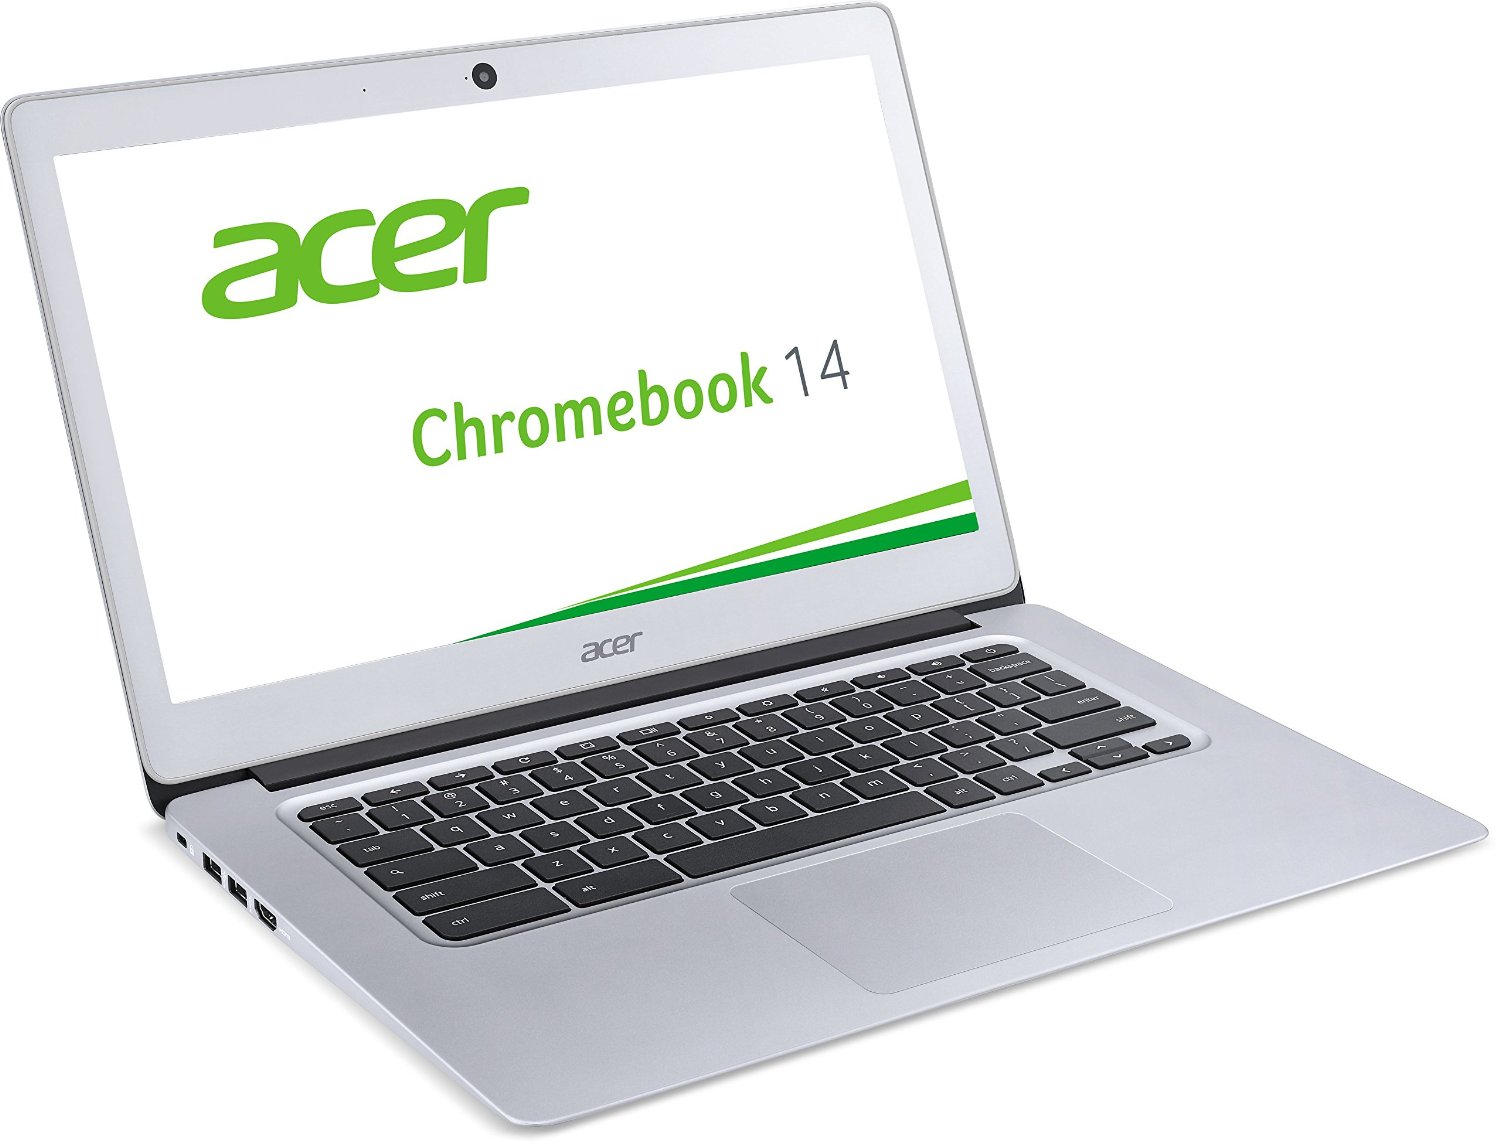 Acer Chromebook 14 now available for 330 Euros - NotebookCheck.net News1500 x 1144